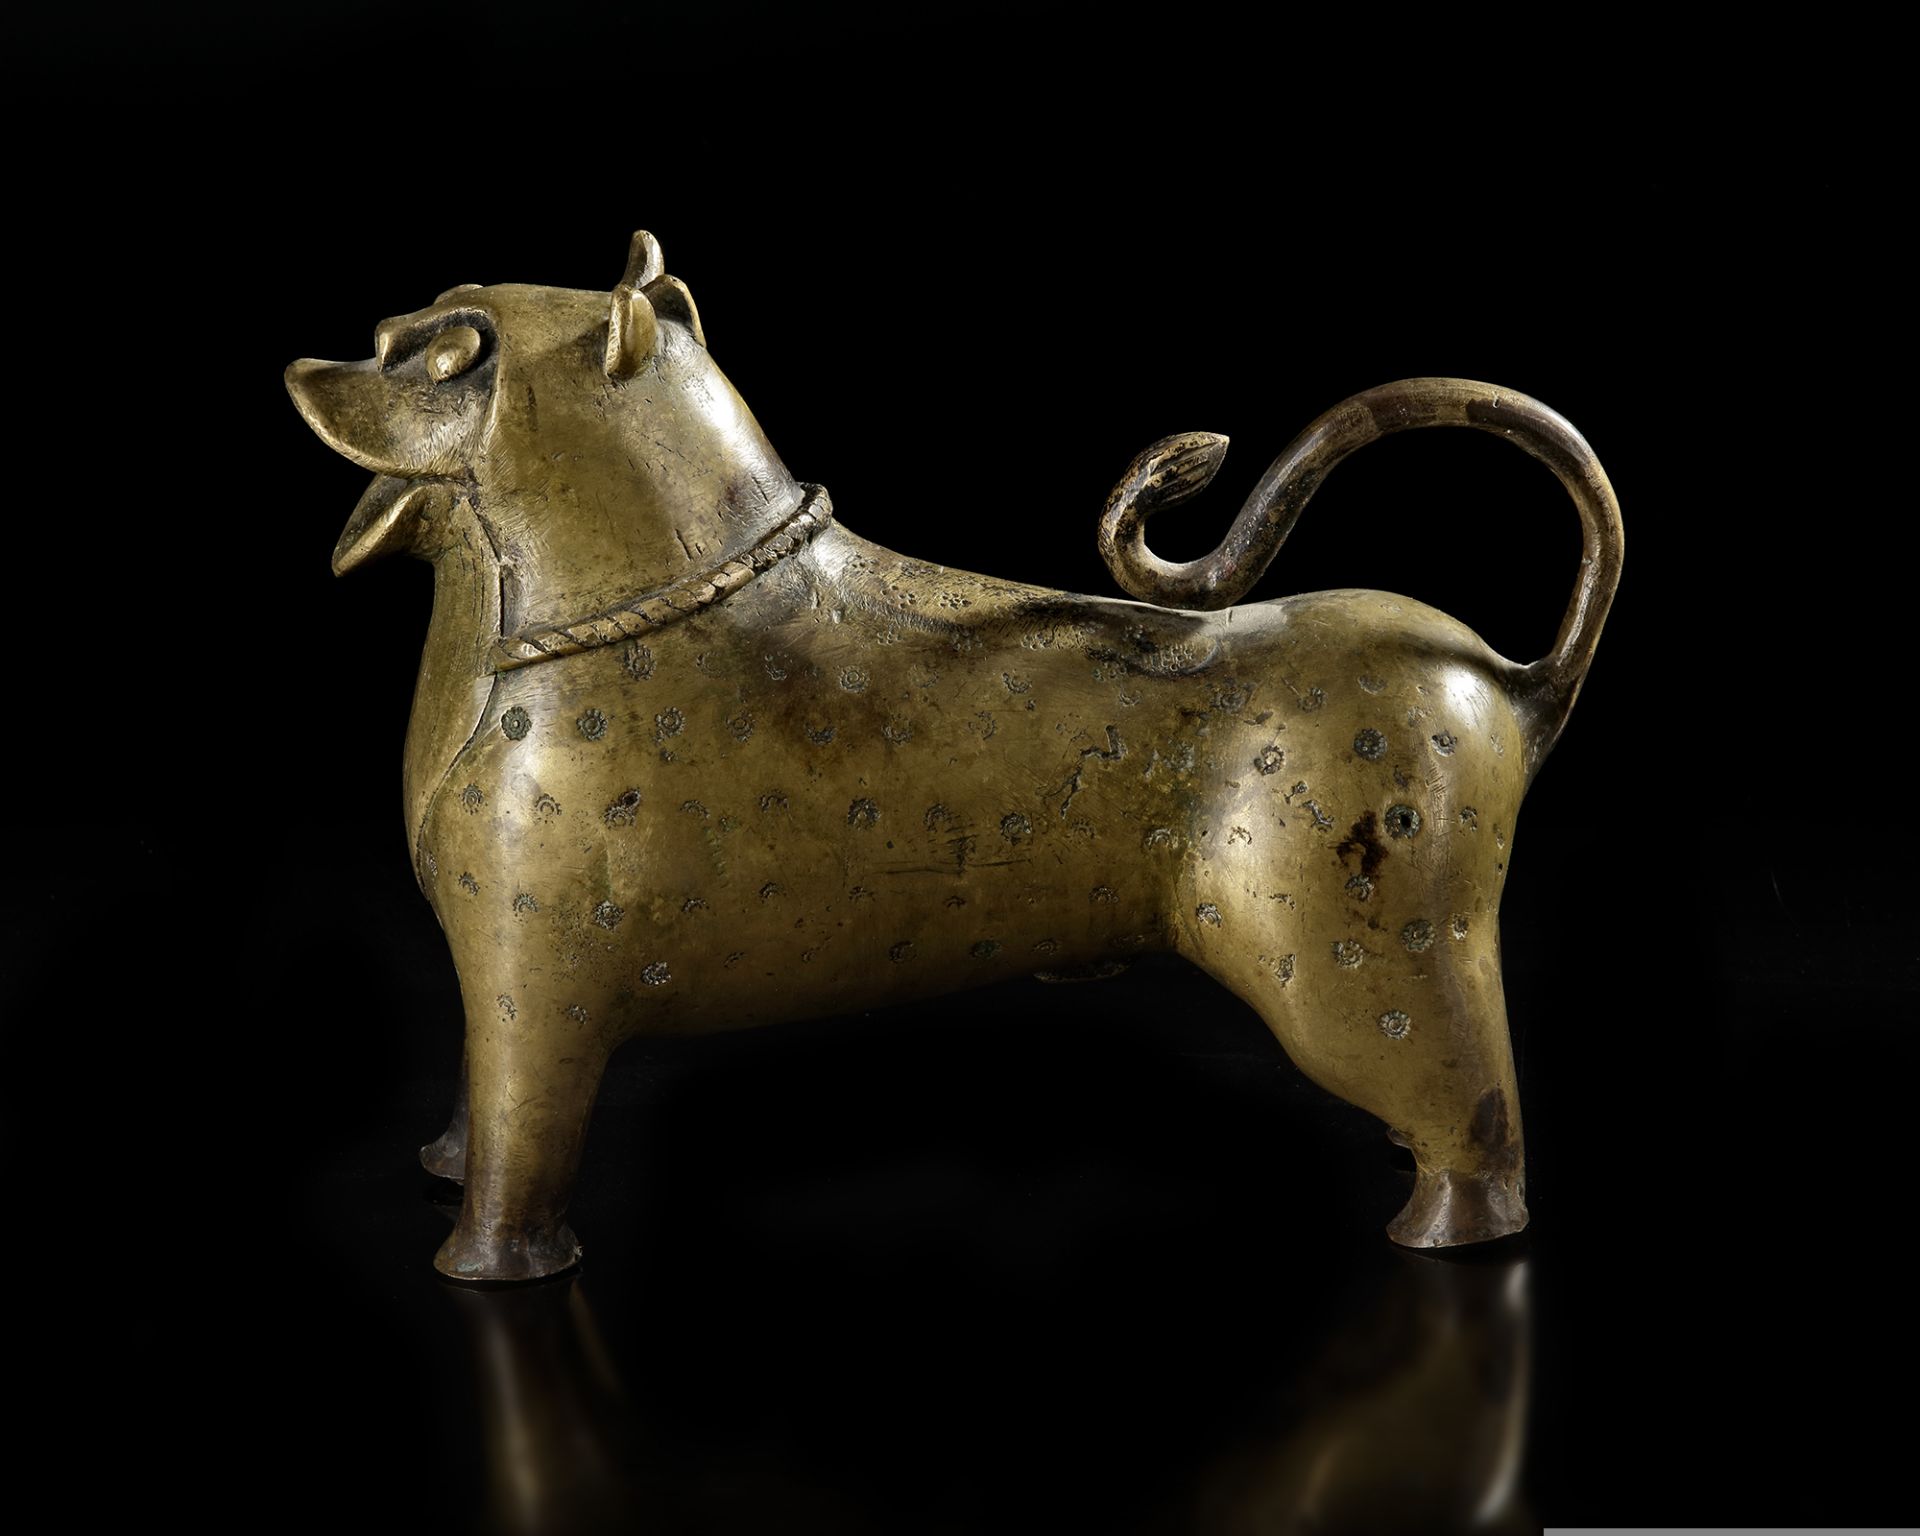 A MUGHAL BRASS INCENSE BURNER IN THE FORM OF A LION, INDIA, 17TH CENTURY - Image 2 of 2